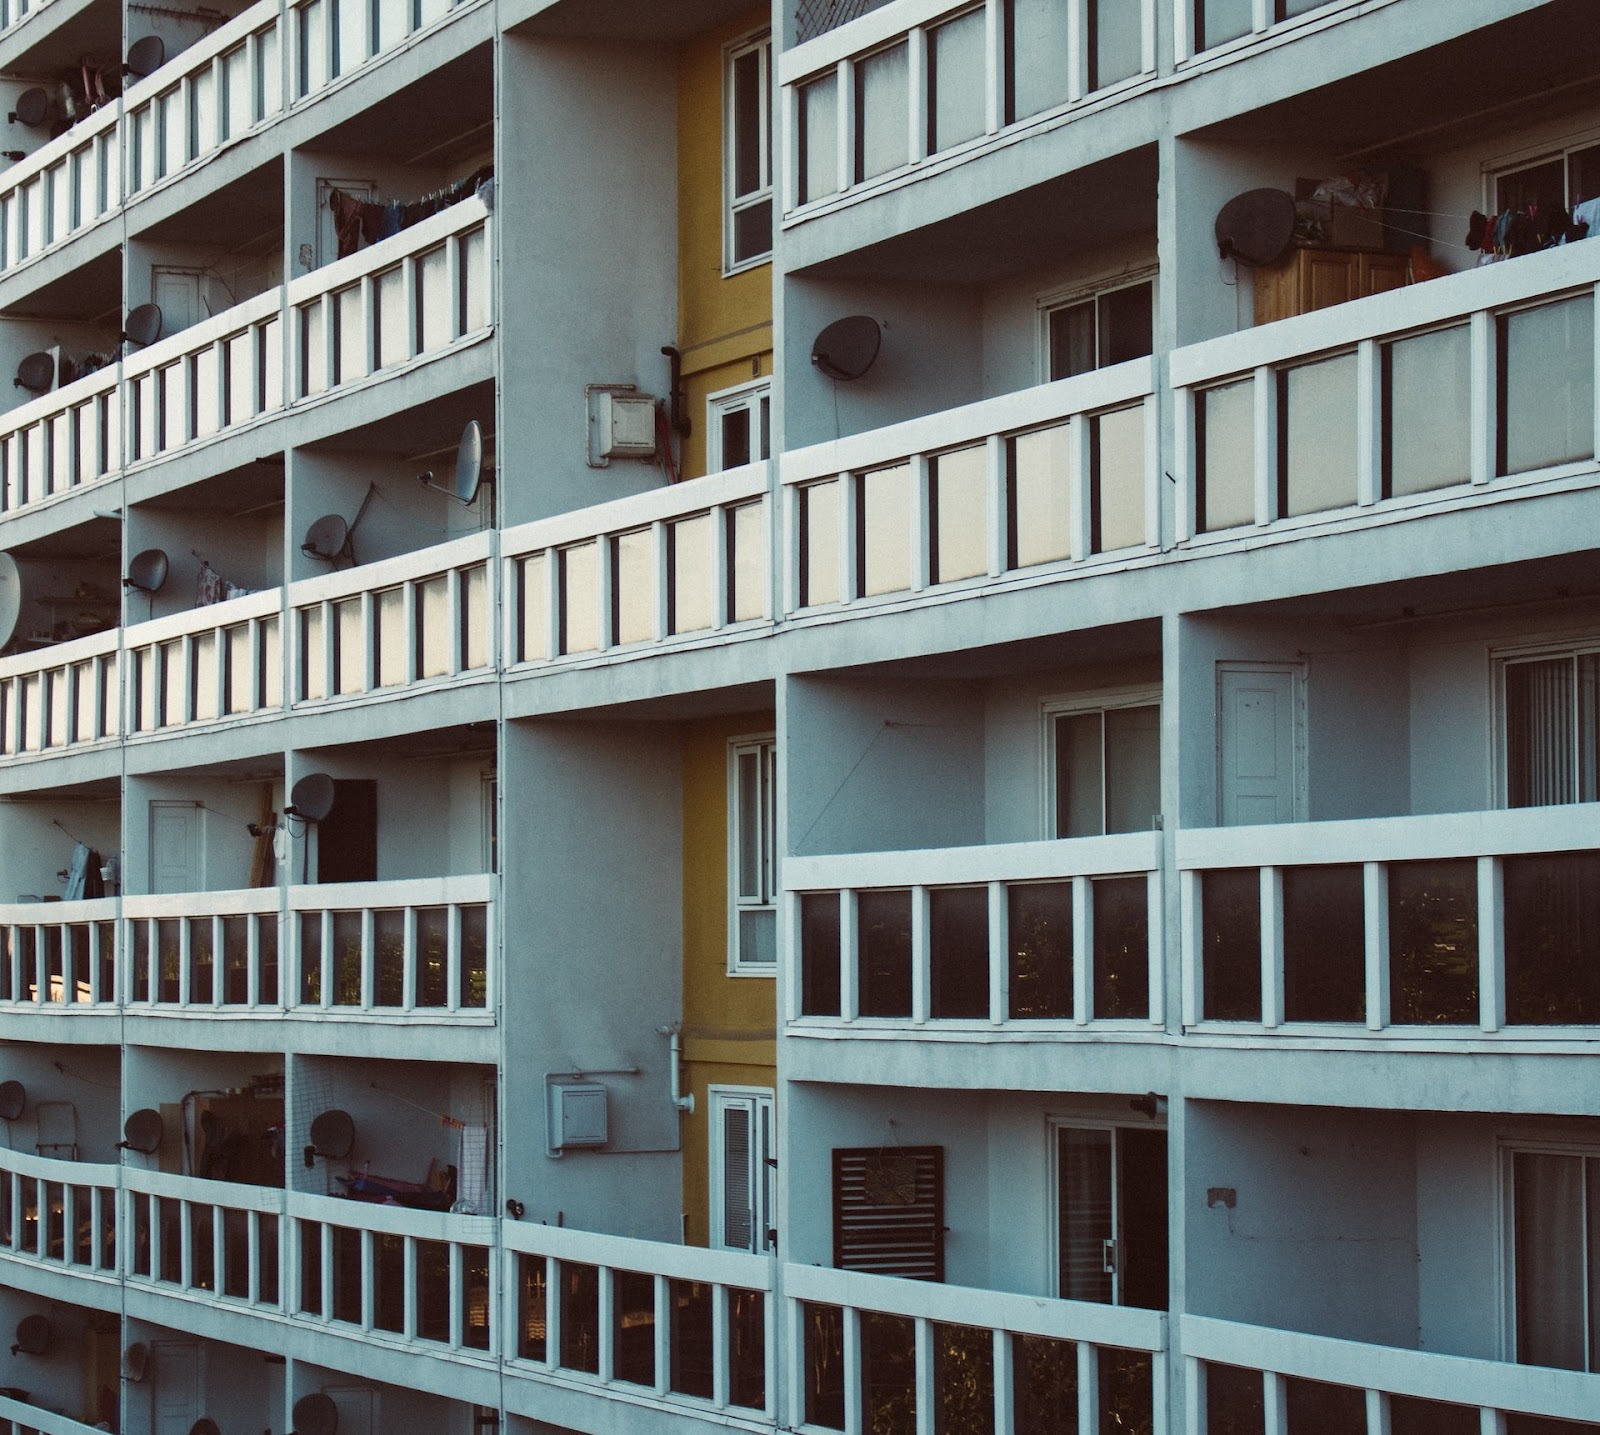 A block of pale blue flats with balconies